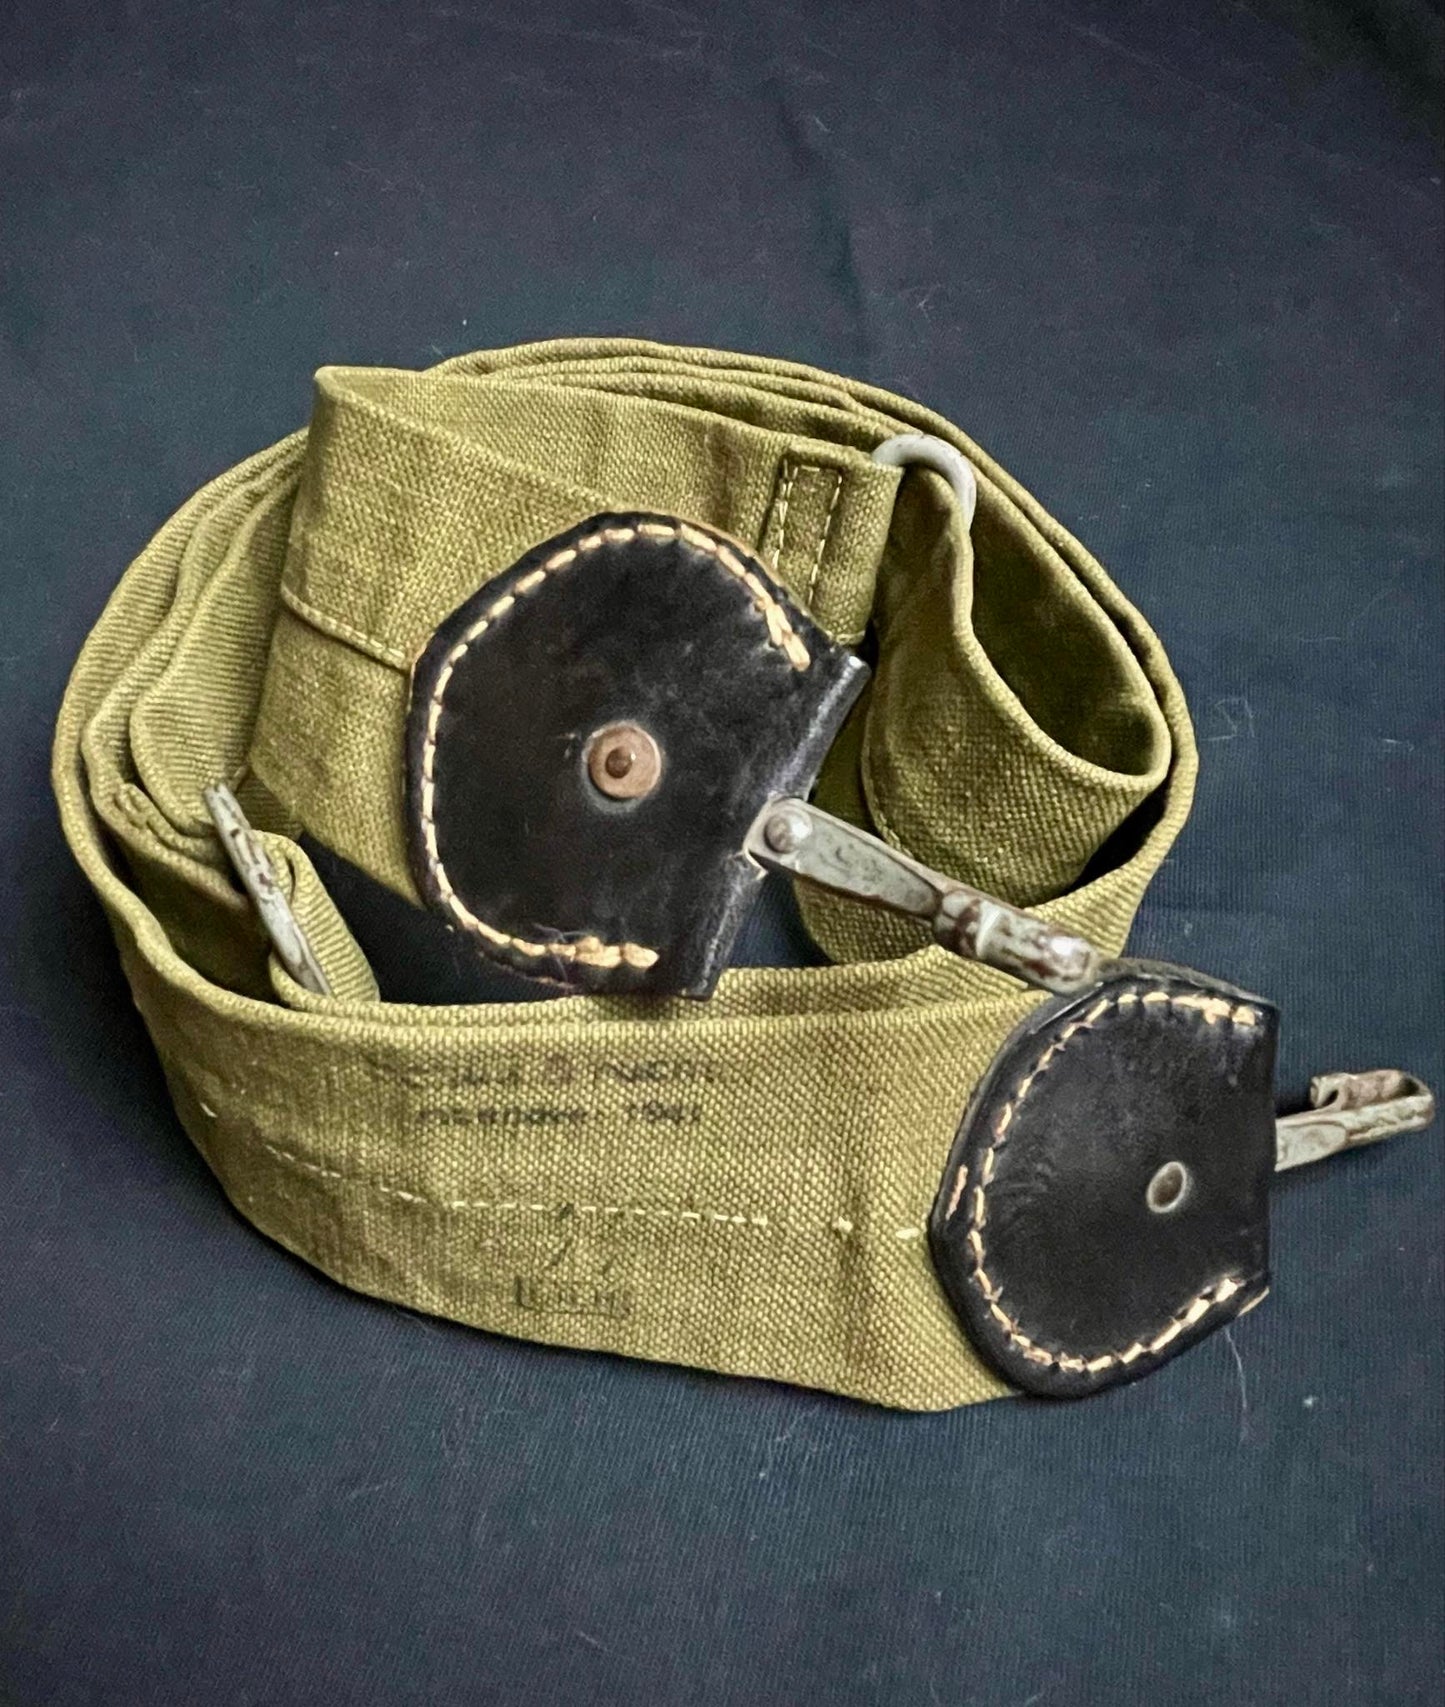 GERMAN WW2 1941 SS L.A.H. BREAD BAG STRAP WIDE VARIANT MAKER, YEAR & UNIT MARKED